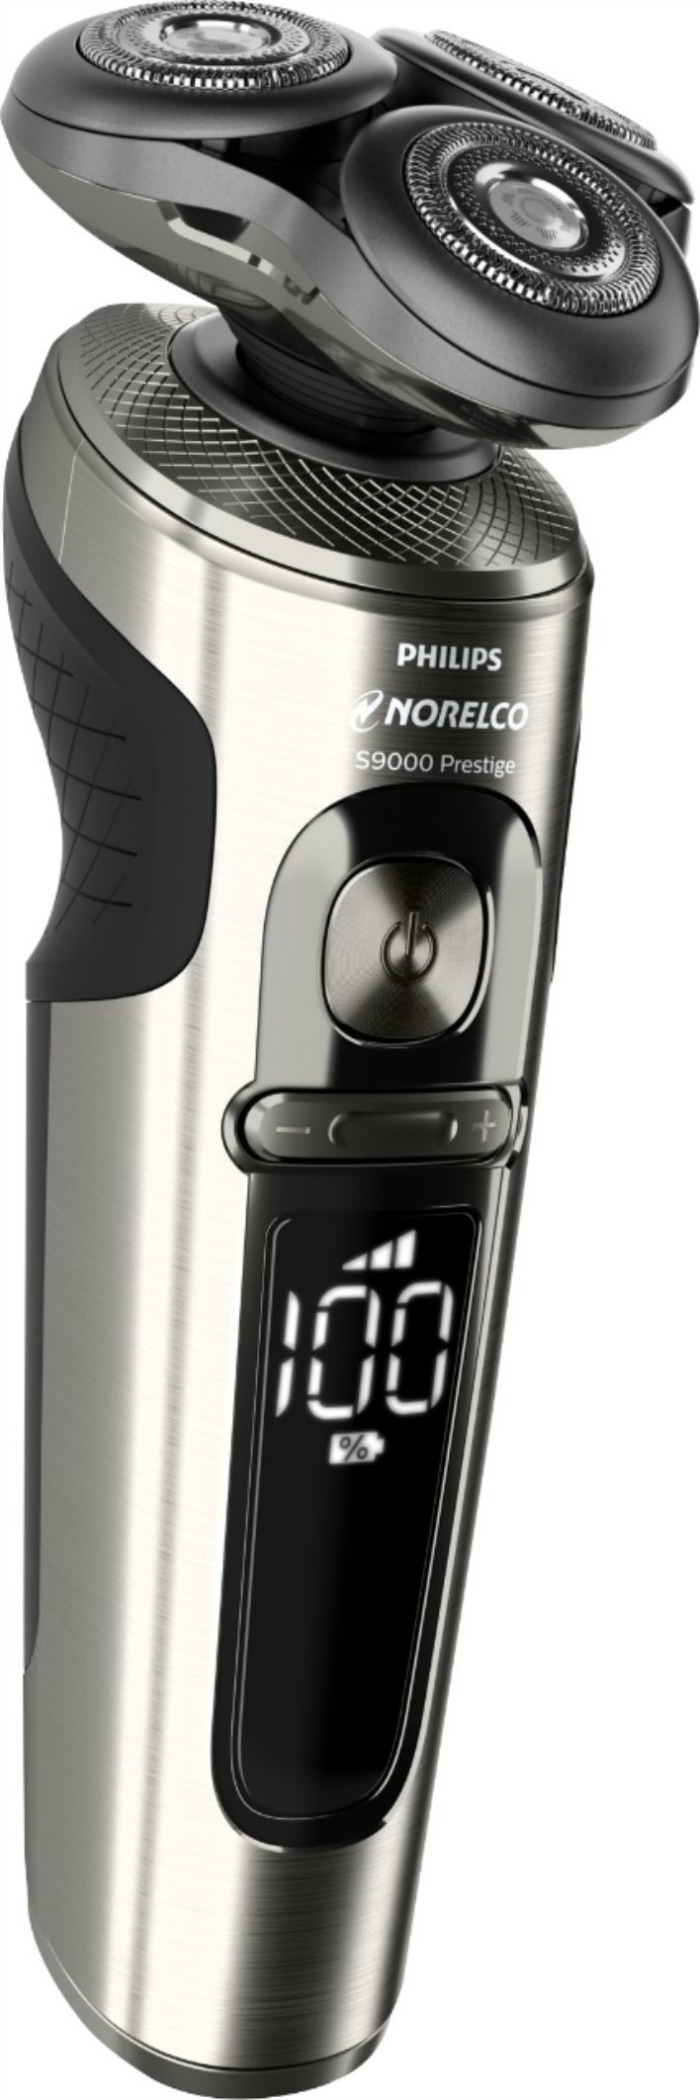 Get a Great Shave with Philips Norelco Electric Shaver at #BestBuy